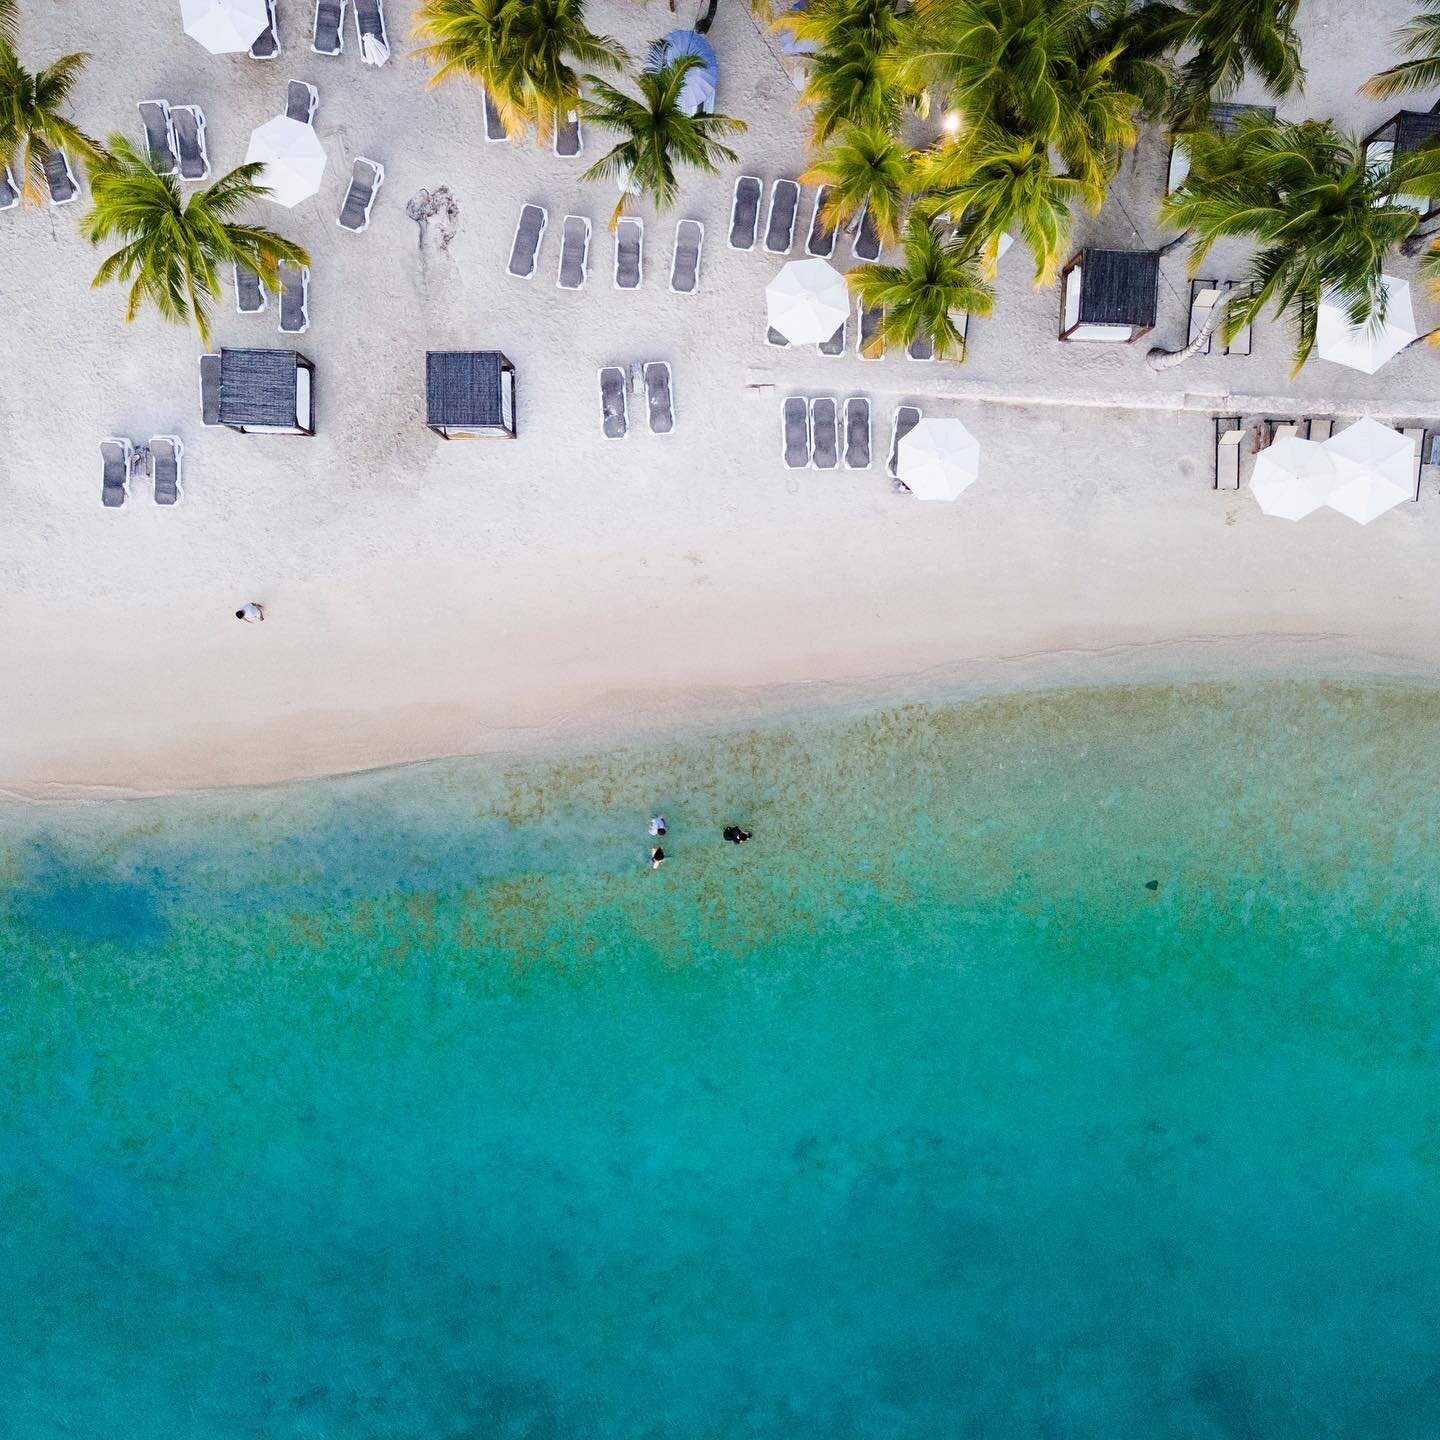 Droning over Mambo beach. Packed with restaurants and amenities, Mambo beach is normally one of the premier resort beaches in curaçao. When we went in January it felt all but deserted, the two lone swimmers in the second photo constituting maybe a h